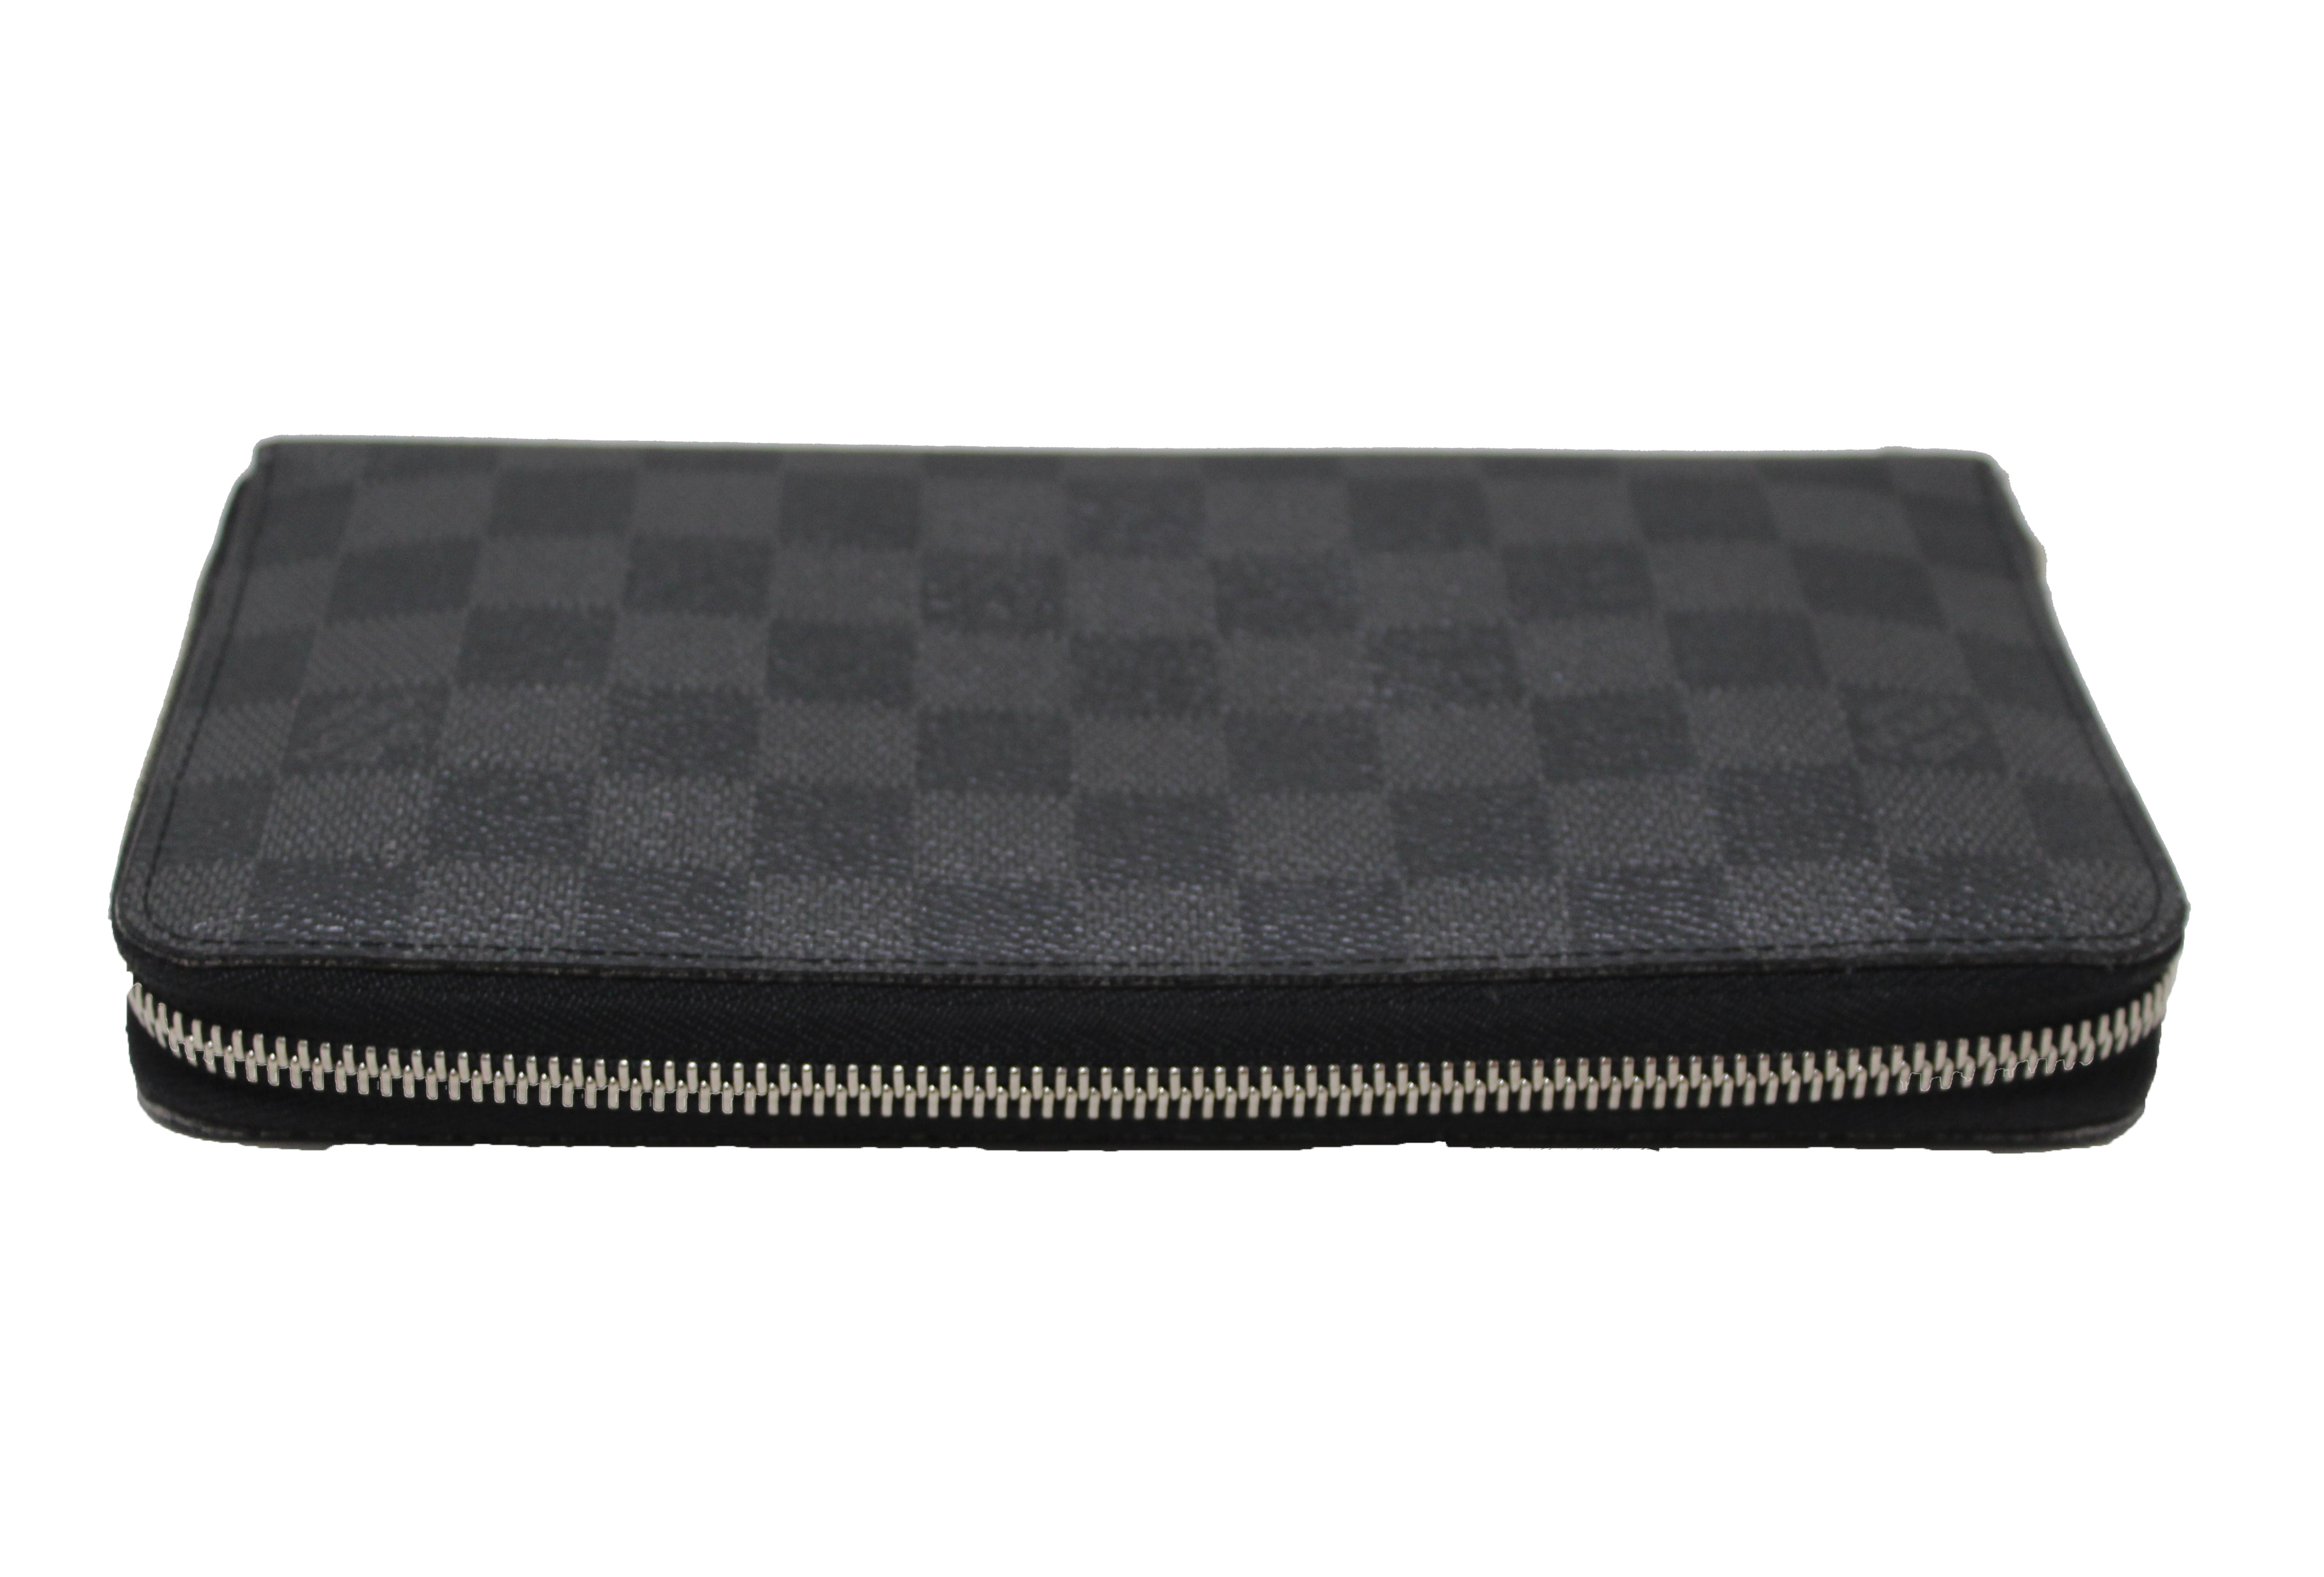 Zippy Dragonne Damier Graphite Canvas - Wallets and Small Leather Goods  N60379